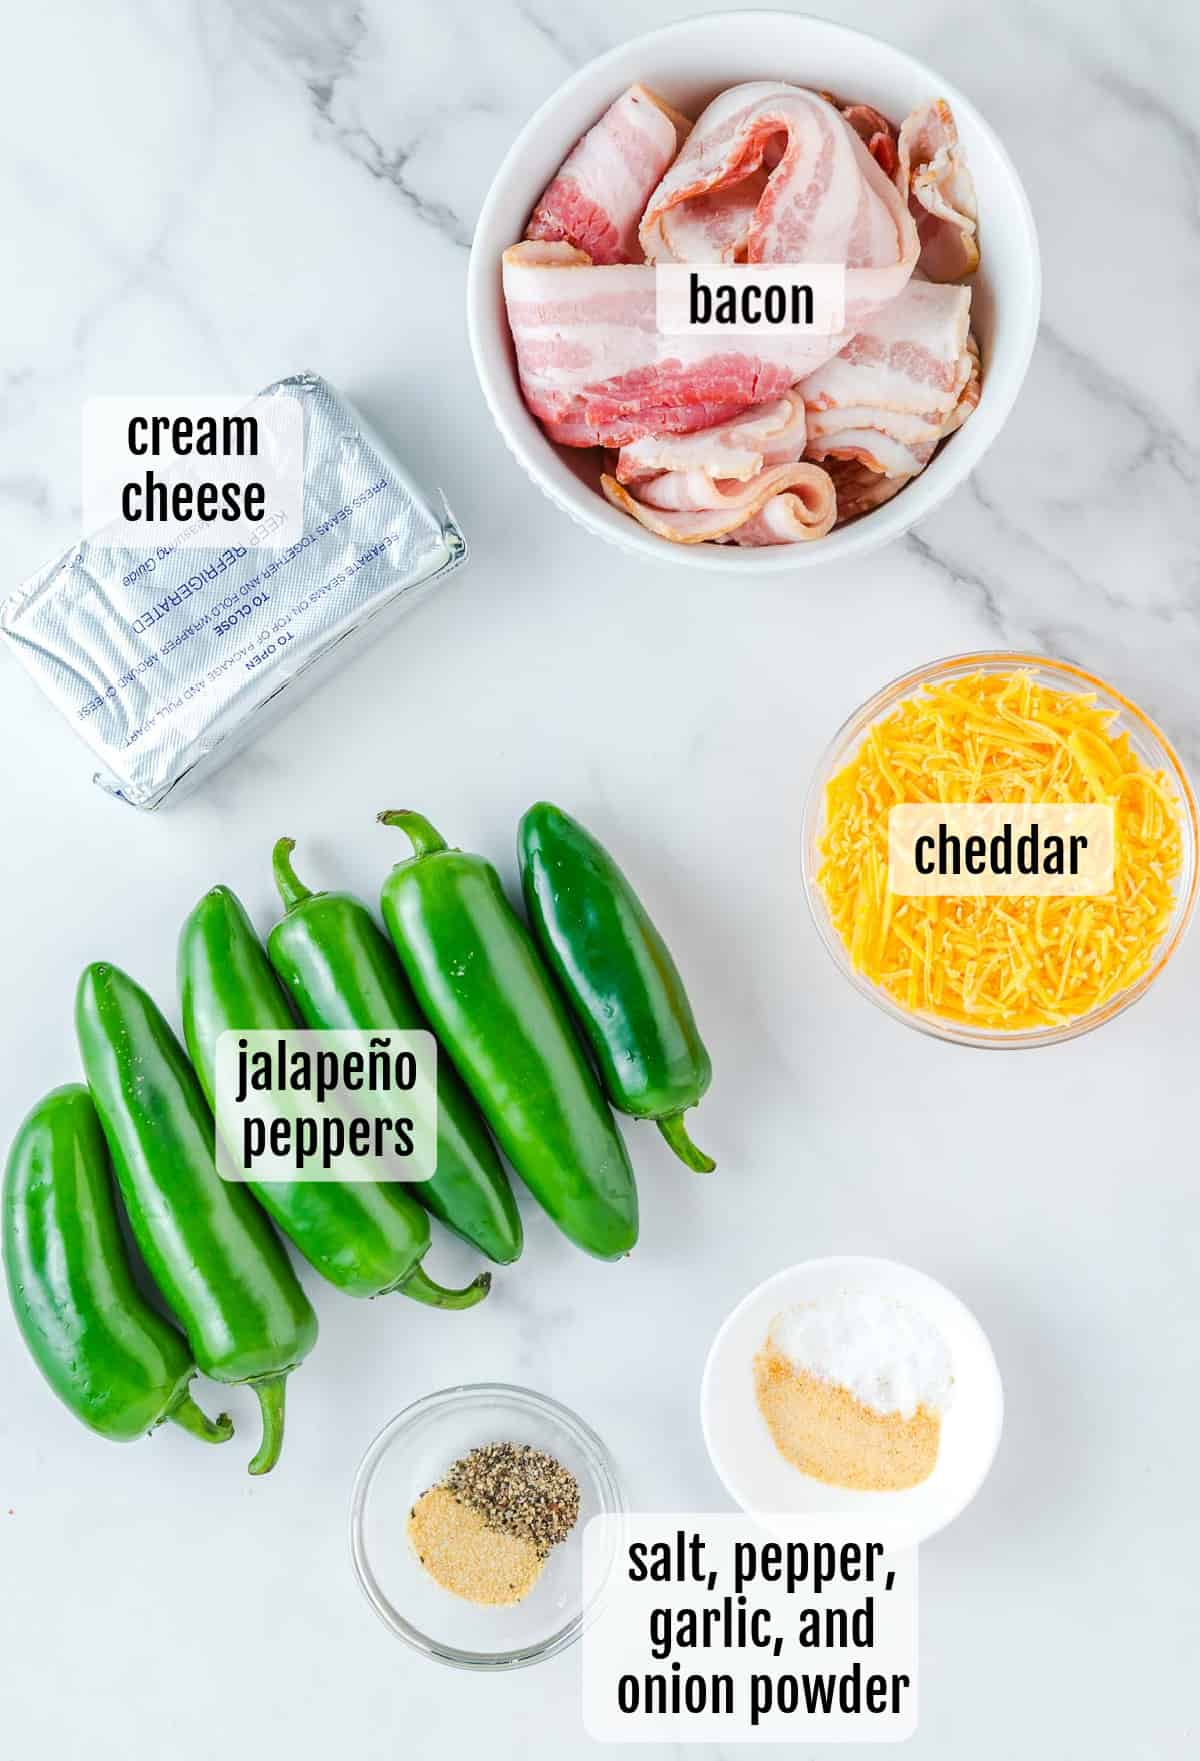 The ingredients for a jalapeno poppers are shown on a marble countertop.